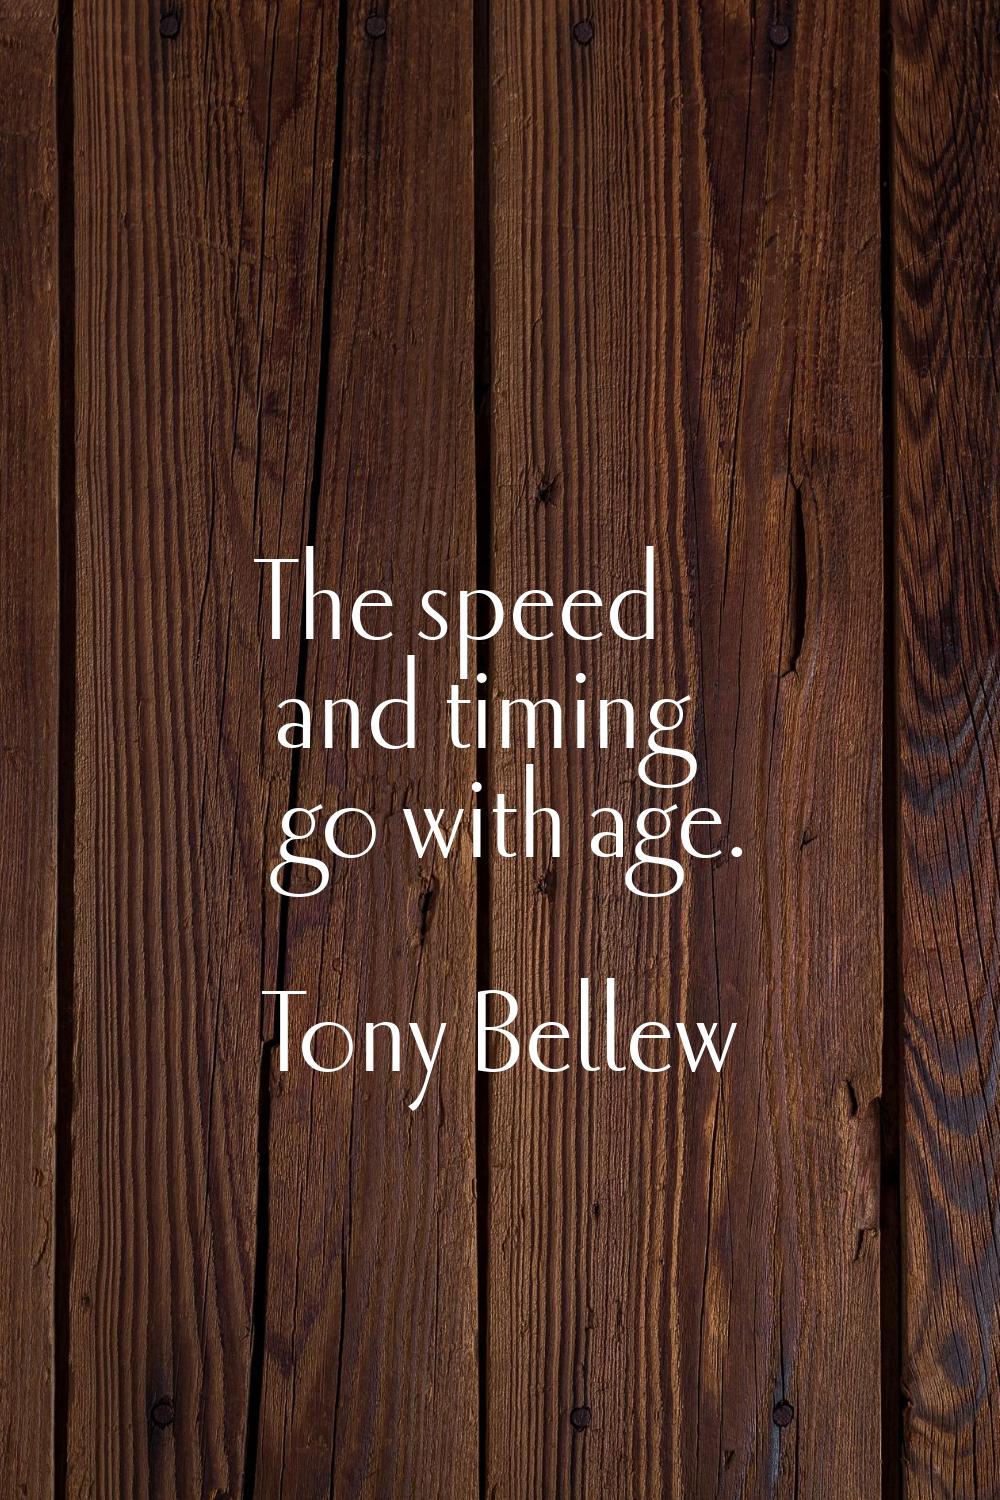 The speed and timing go with age.